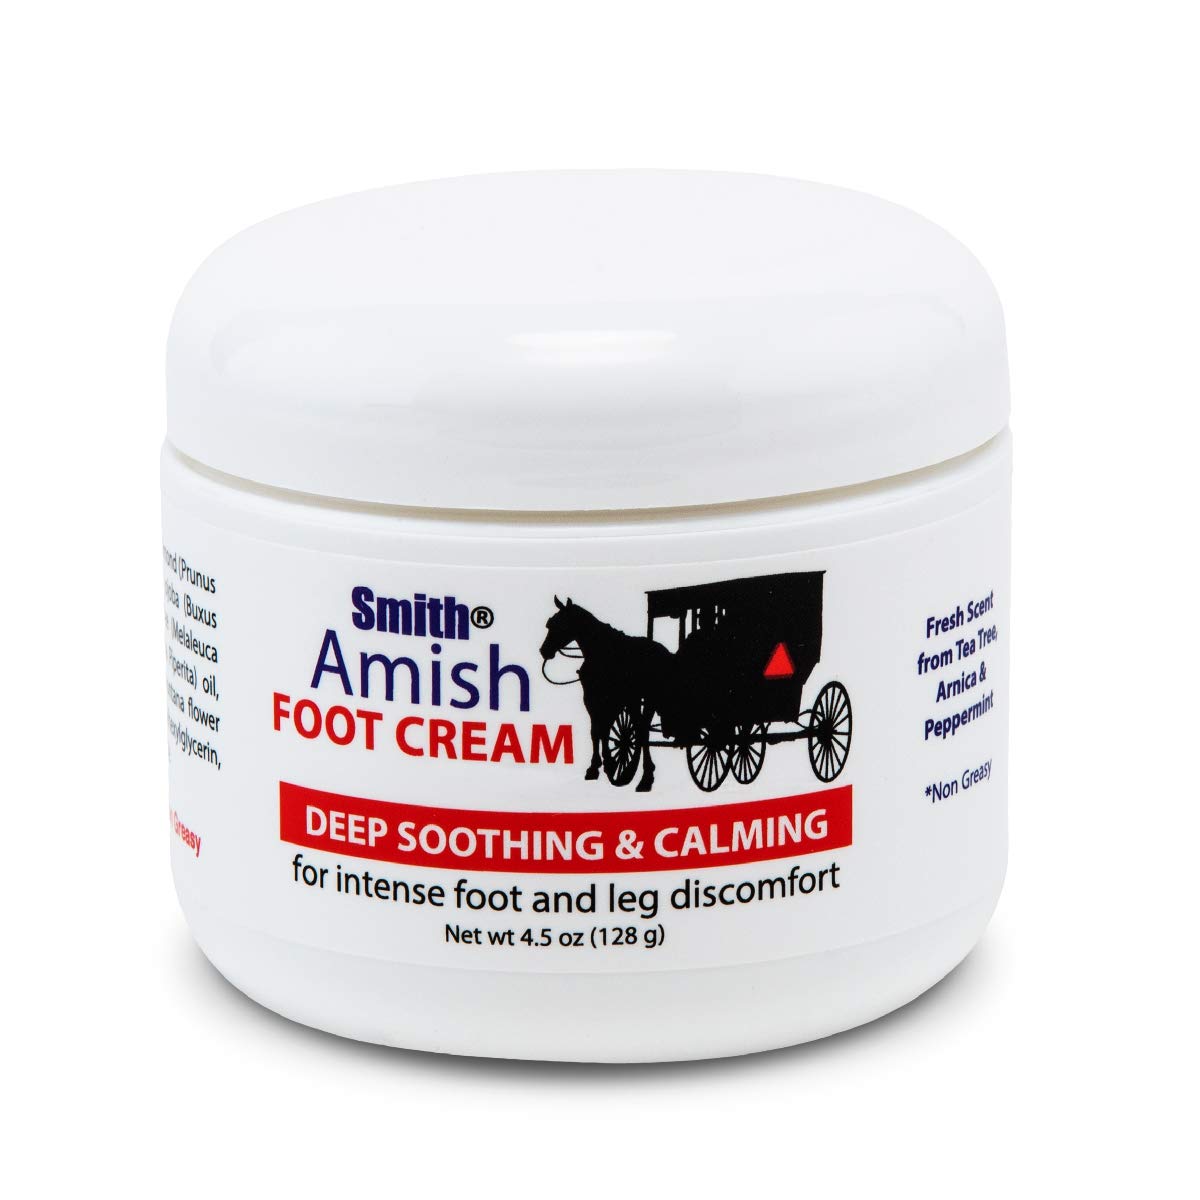 Jar of Smith's Amish Foot Cream featuring a horse and buggy logo, a deep soothing herbal cream for relief of foot and leg discomfort.